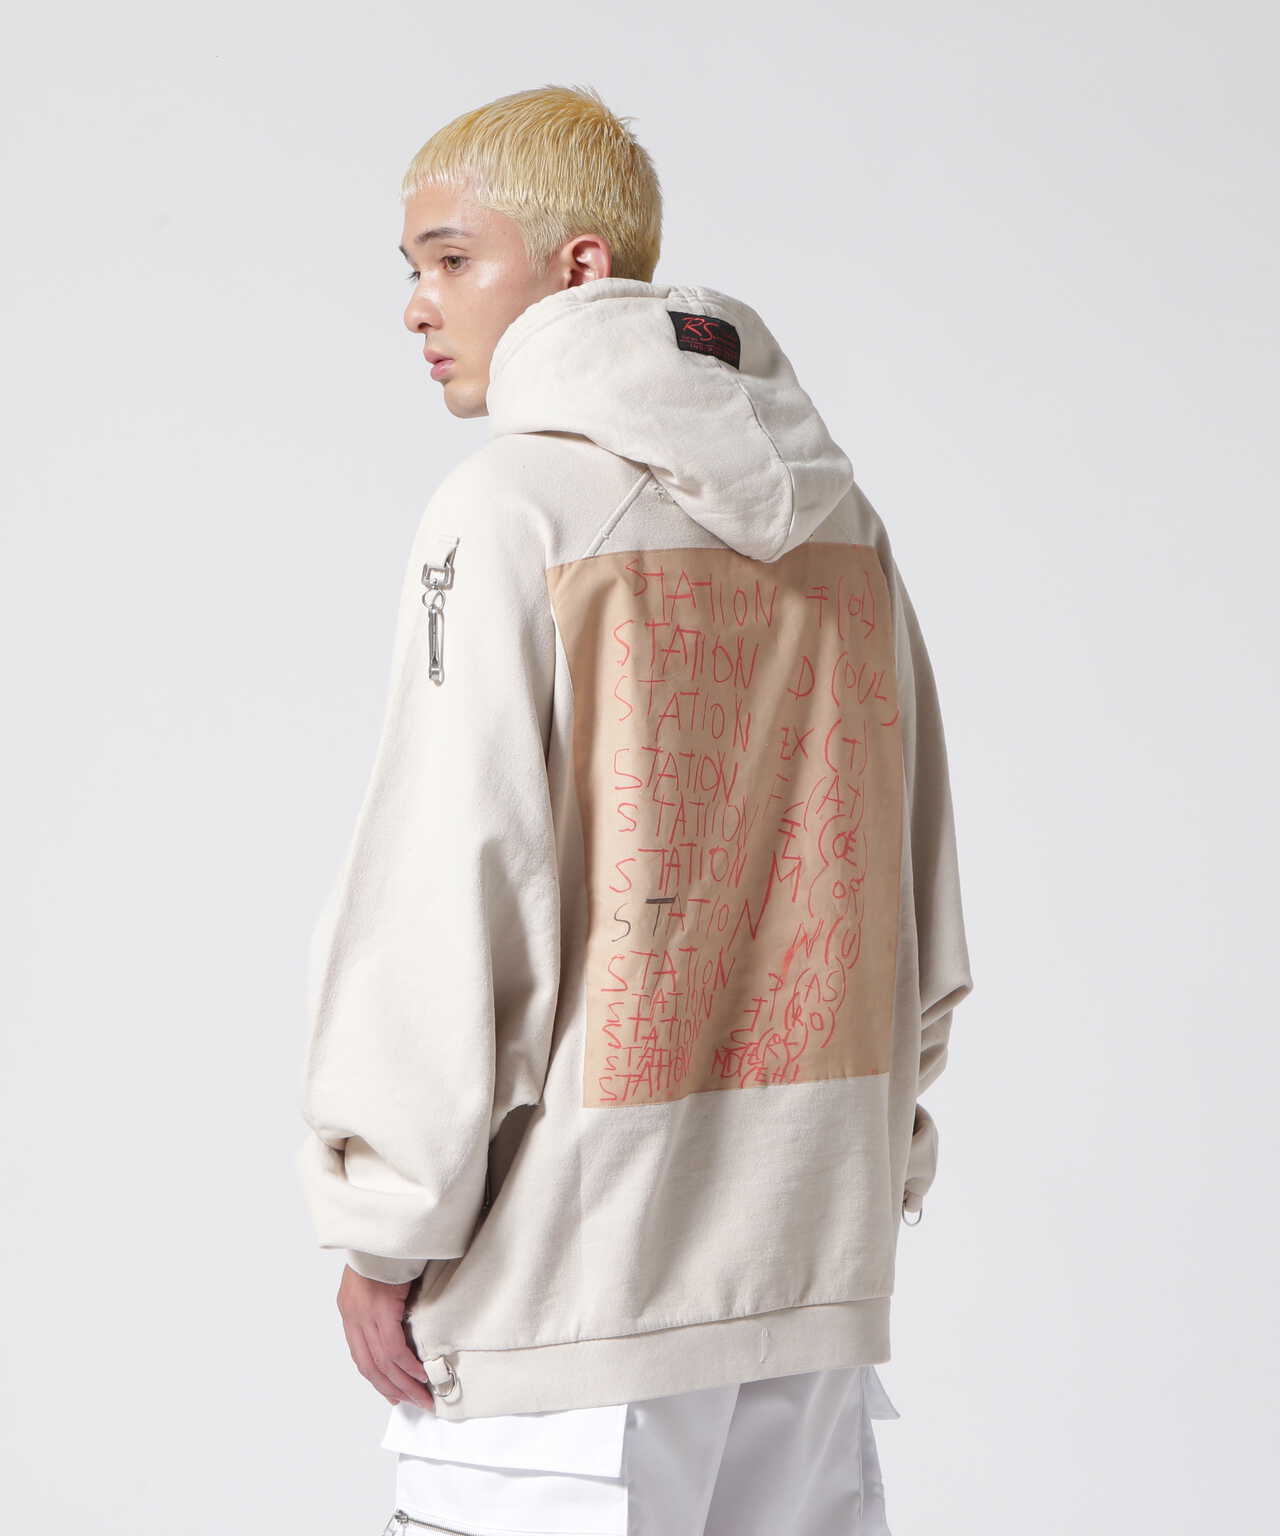 RAF SIMONS/ラフシモンズ/Washed Clasps and patch/パーカー | LHP ...